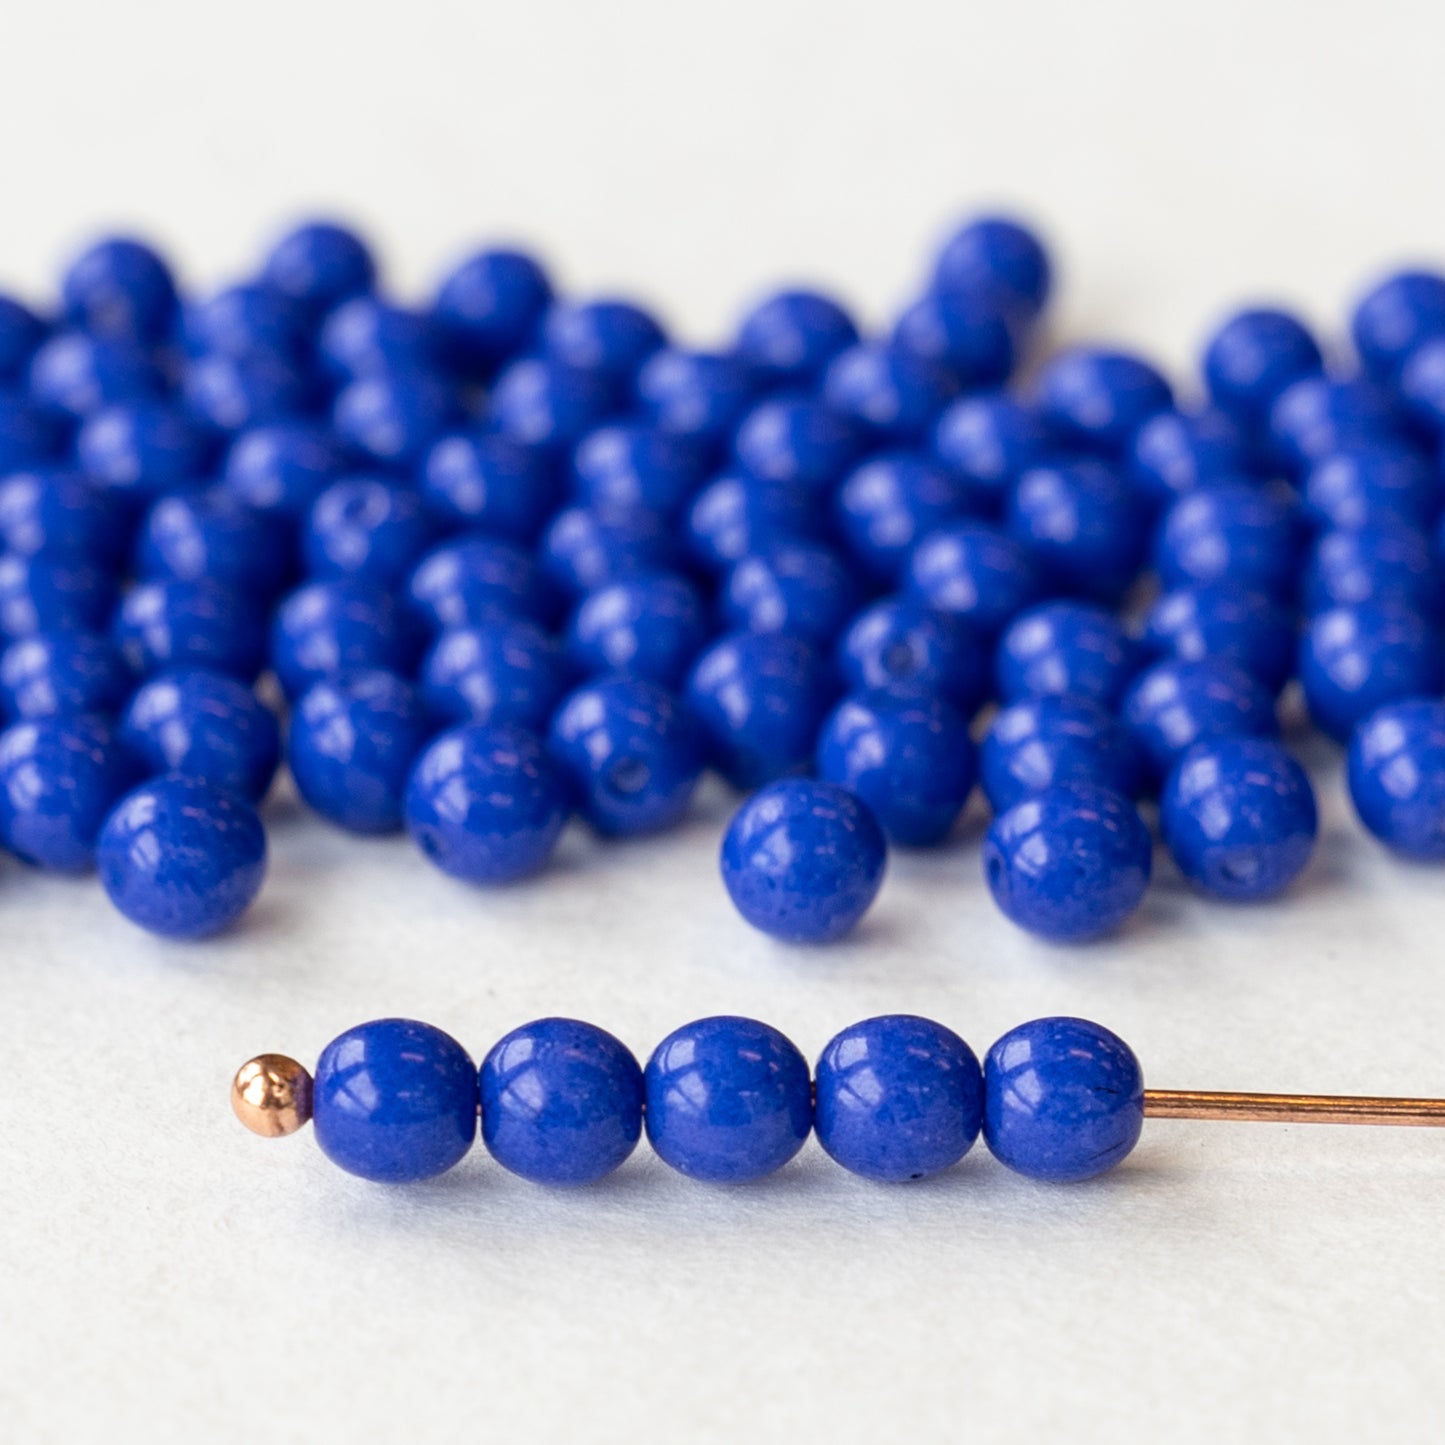 4mm Round Opaques - Blue - 100 Beads